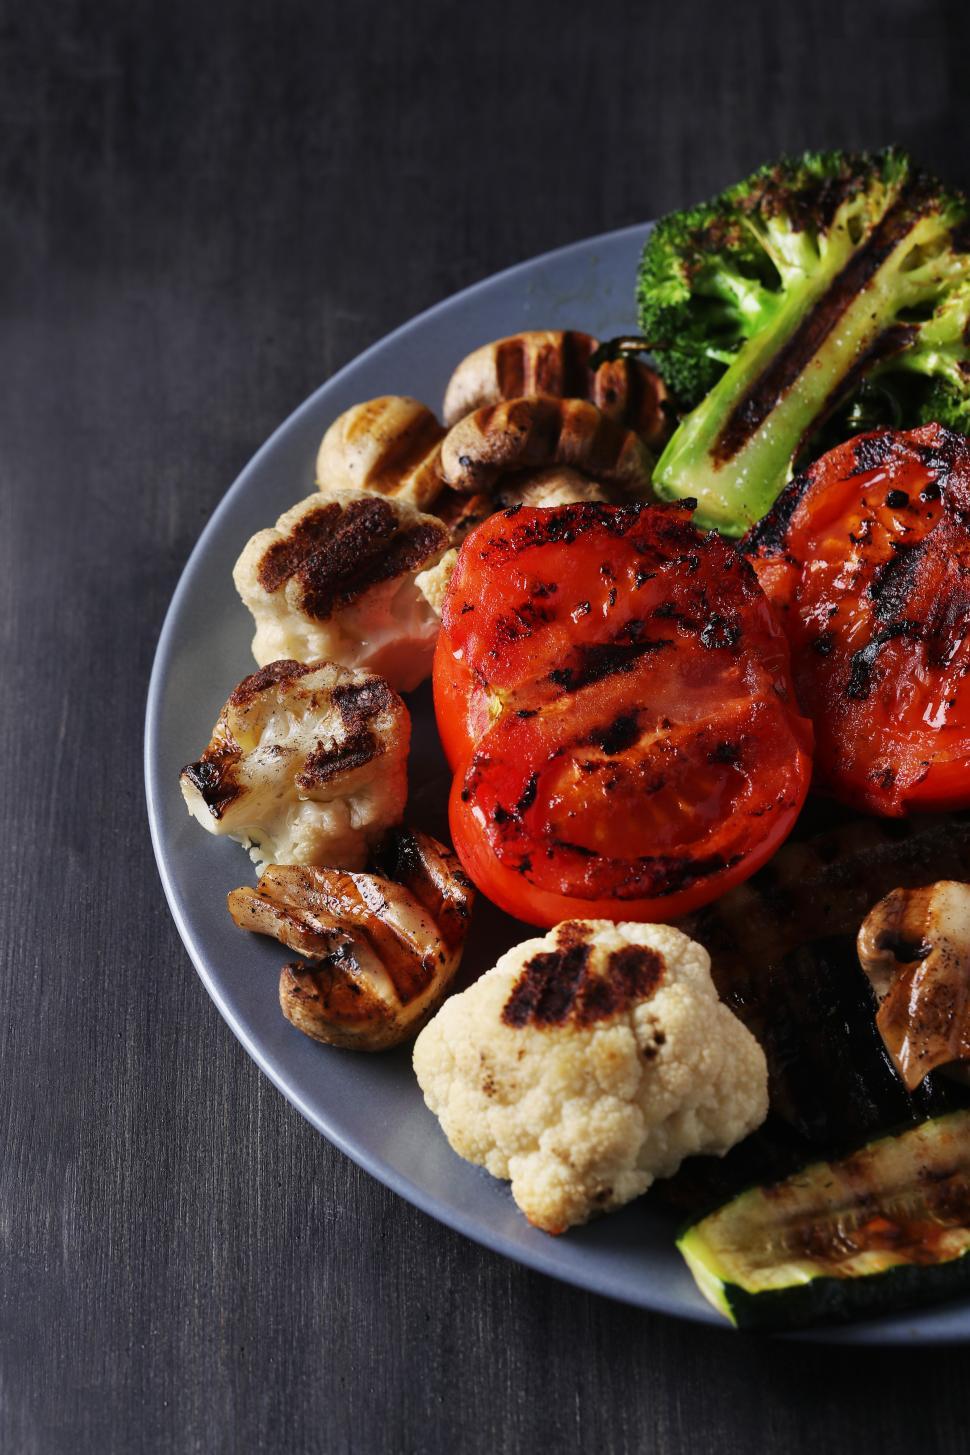 Free Image of Plate of grilled vegetables 